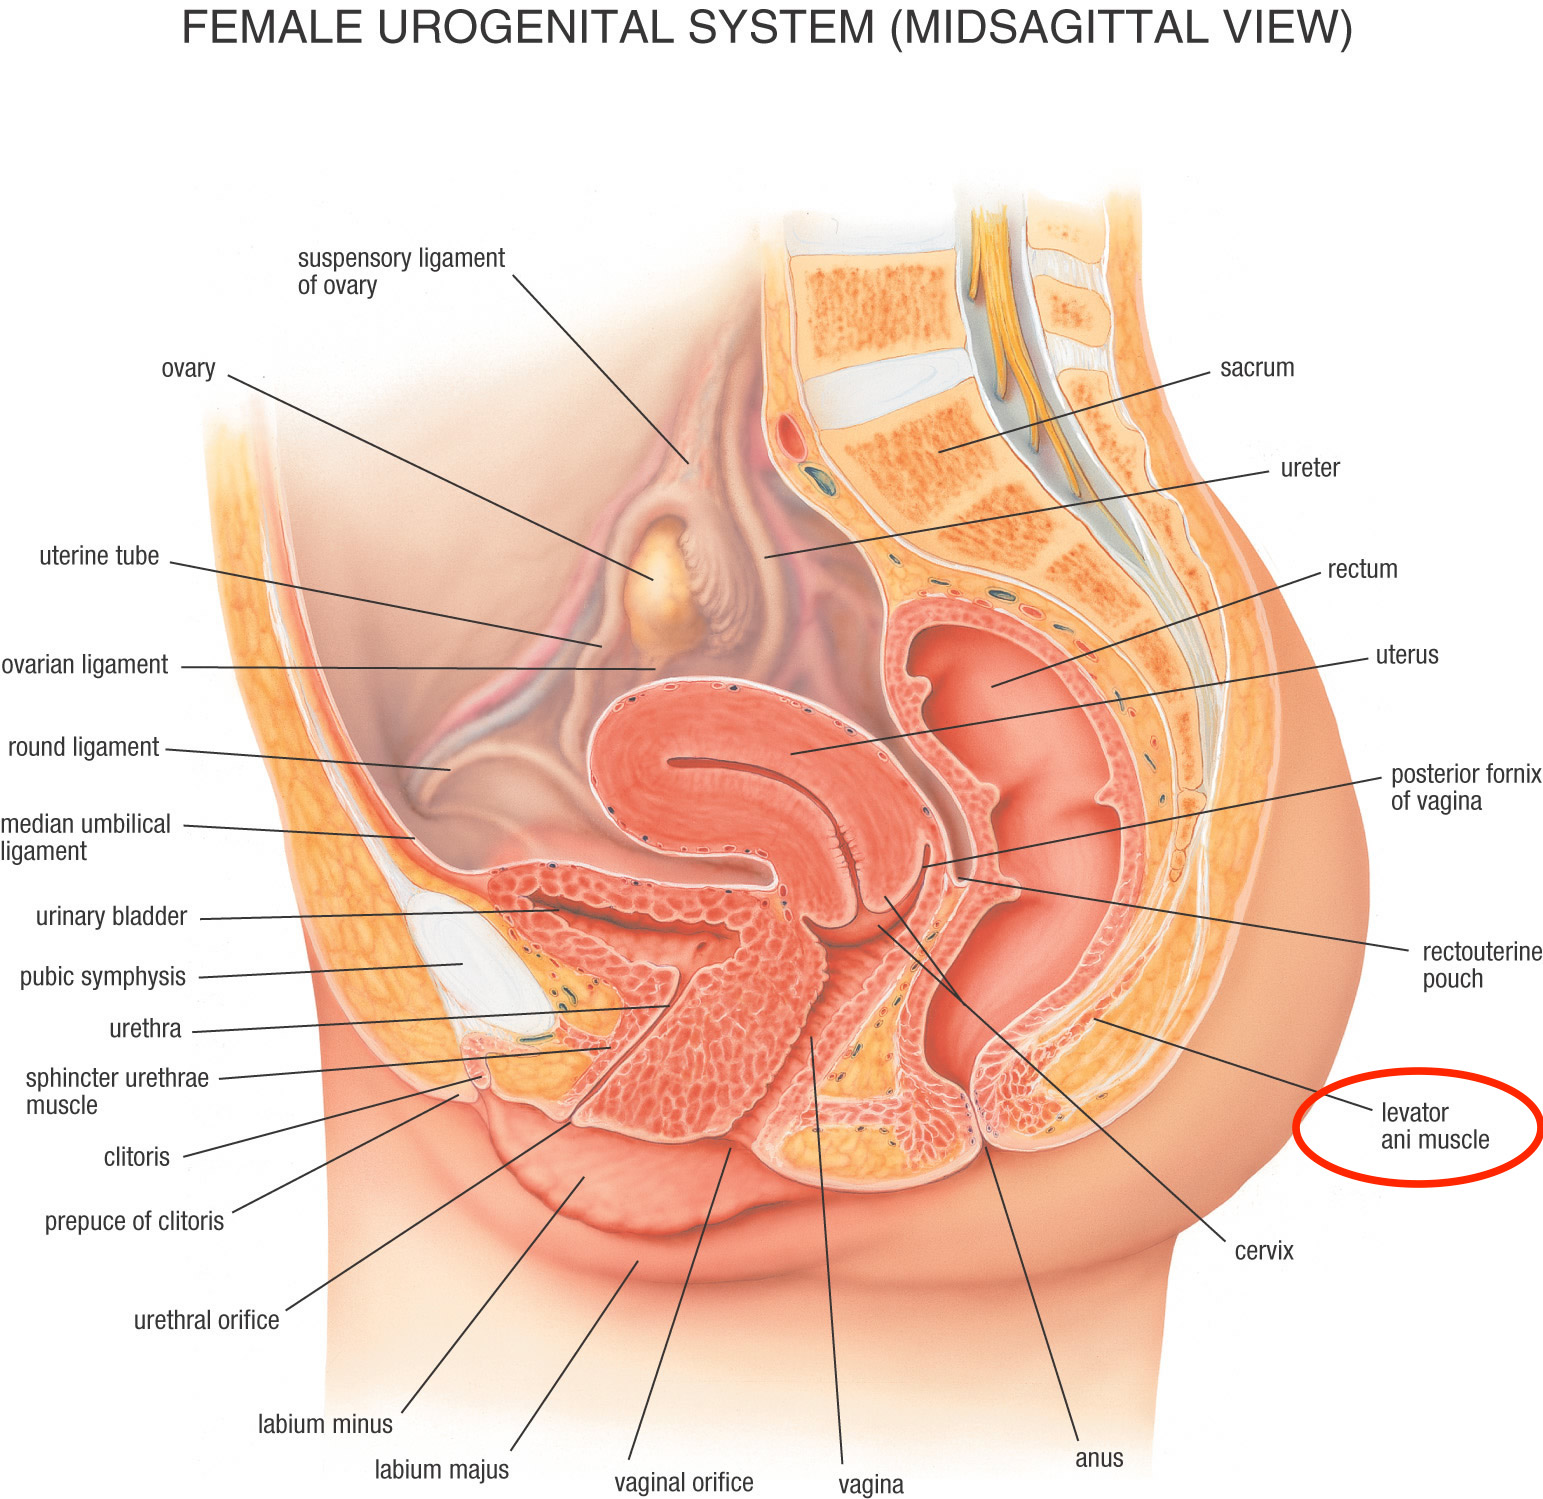 Anatomical location of the levator ani muscle in a female (source) 